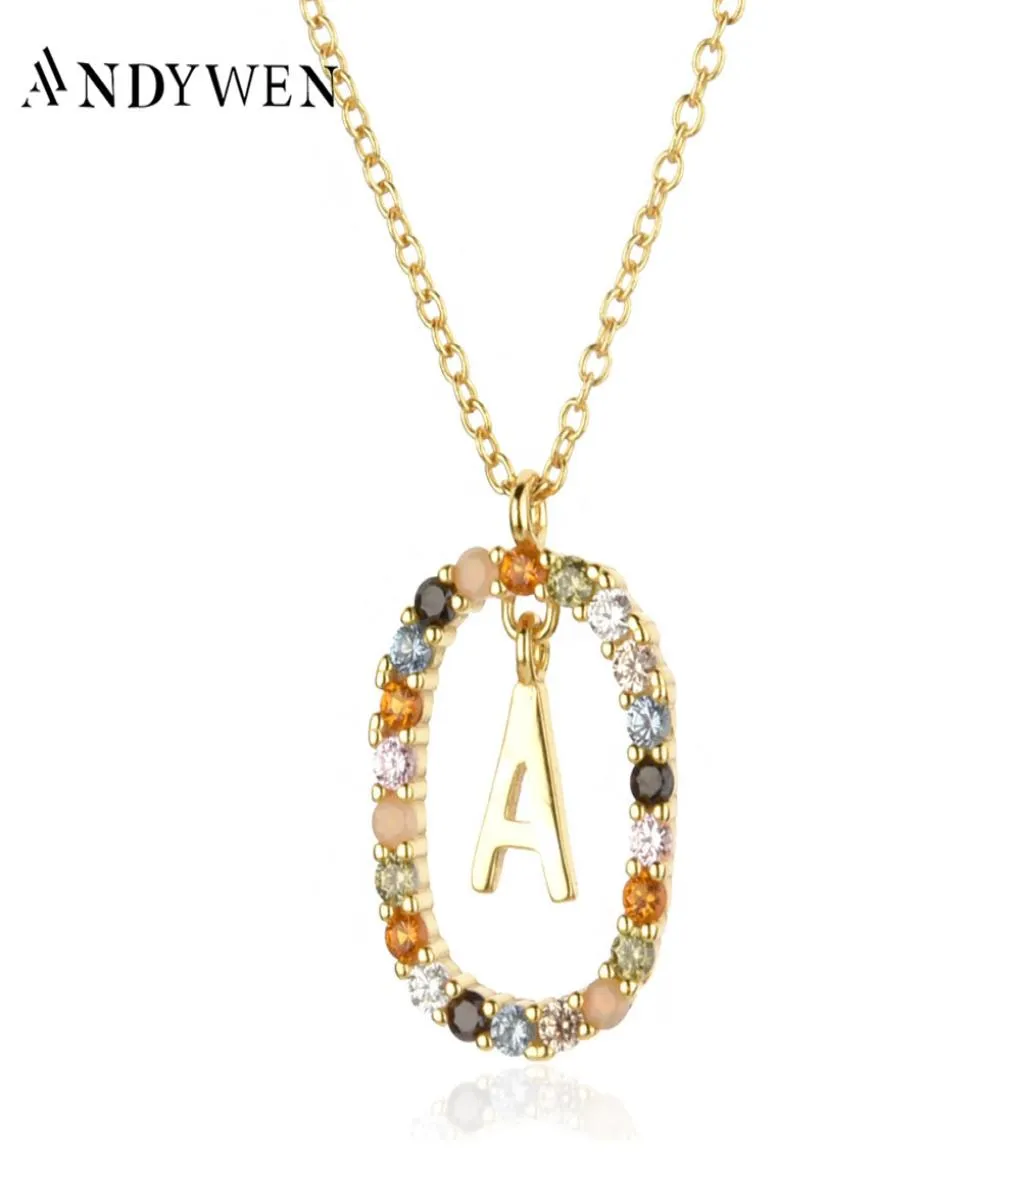 Pendre en argent sterling Personnalisé Gold Chain Fine Jewelrysecklaces Andywen 925 STERLING Silver Gold Letters A Z Initial M S C4305698